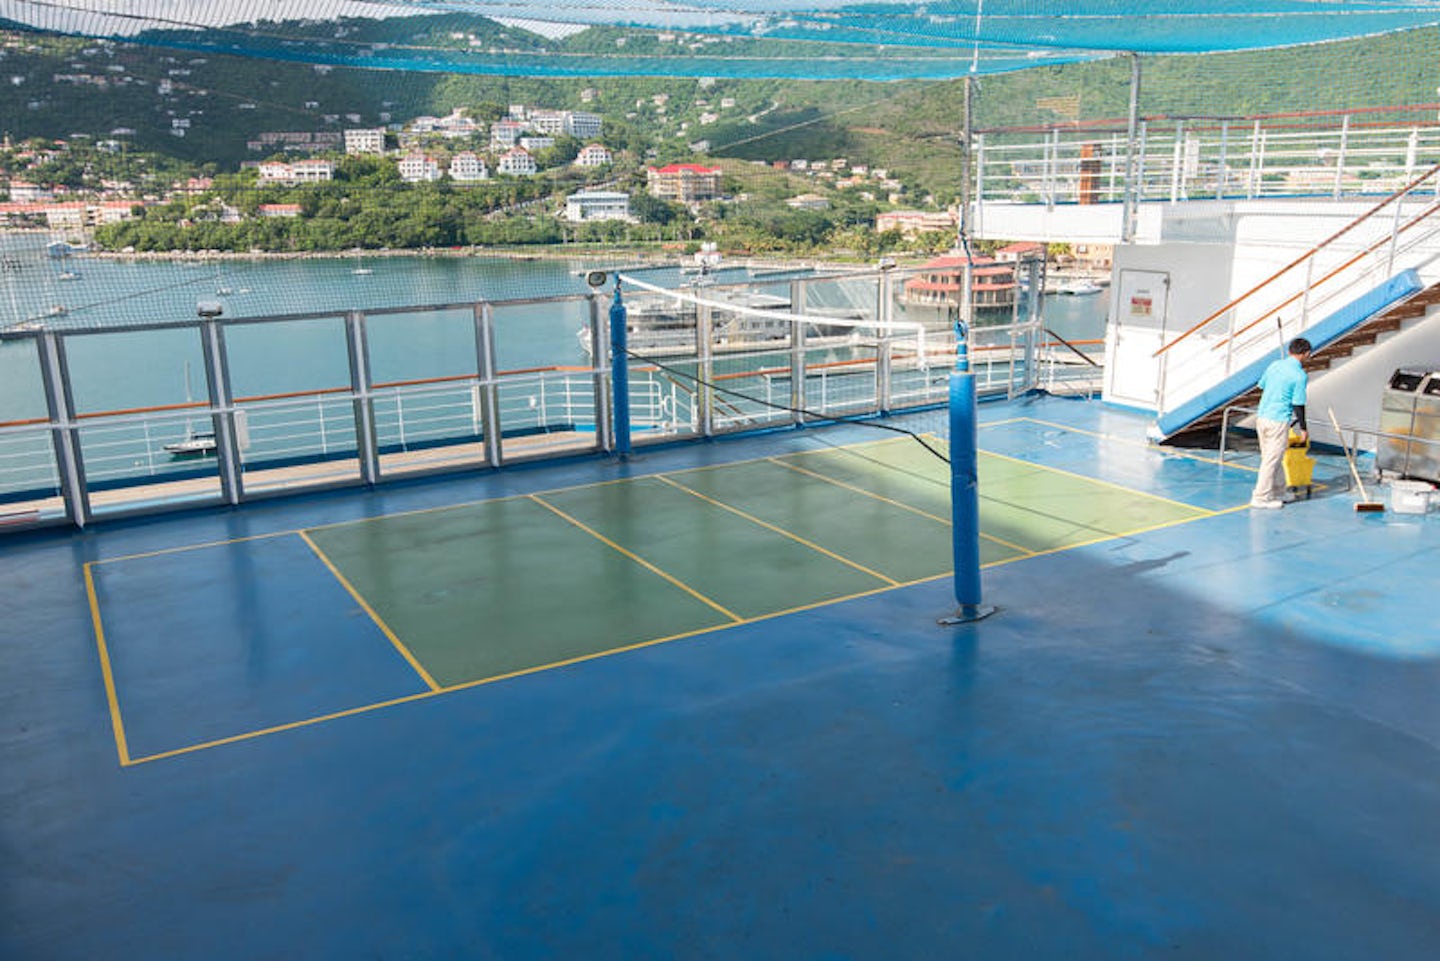 Sports Deck on Carnival Liberty